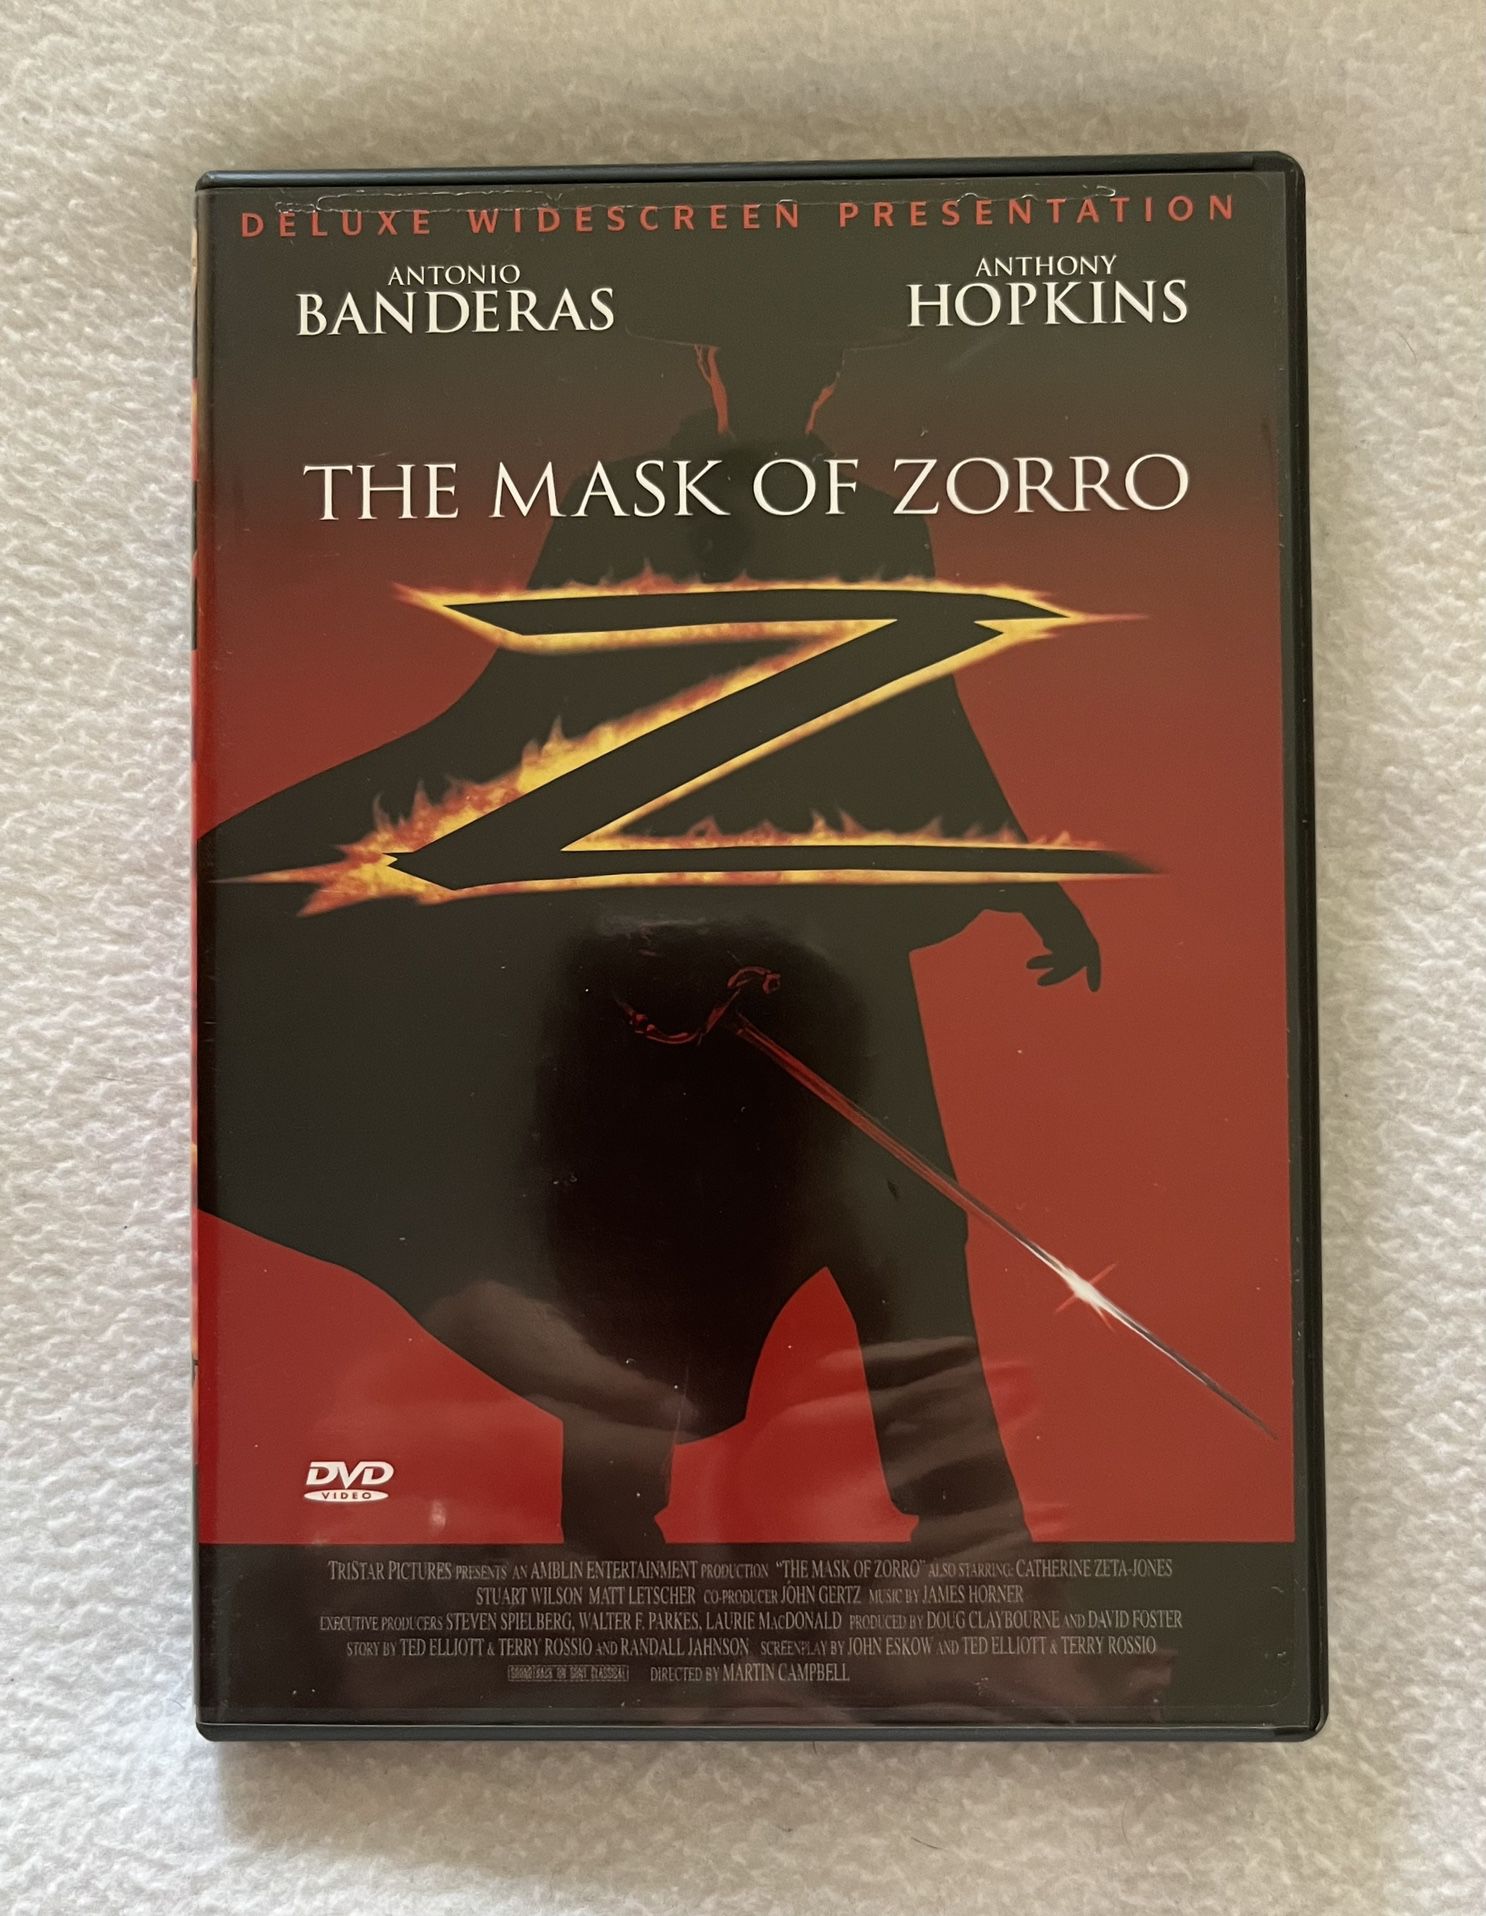 The Mask of Zorro (DVD, 1998, Deluxe Widescreen) 